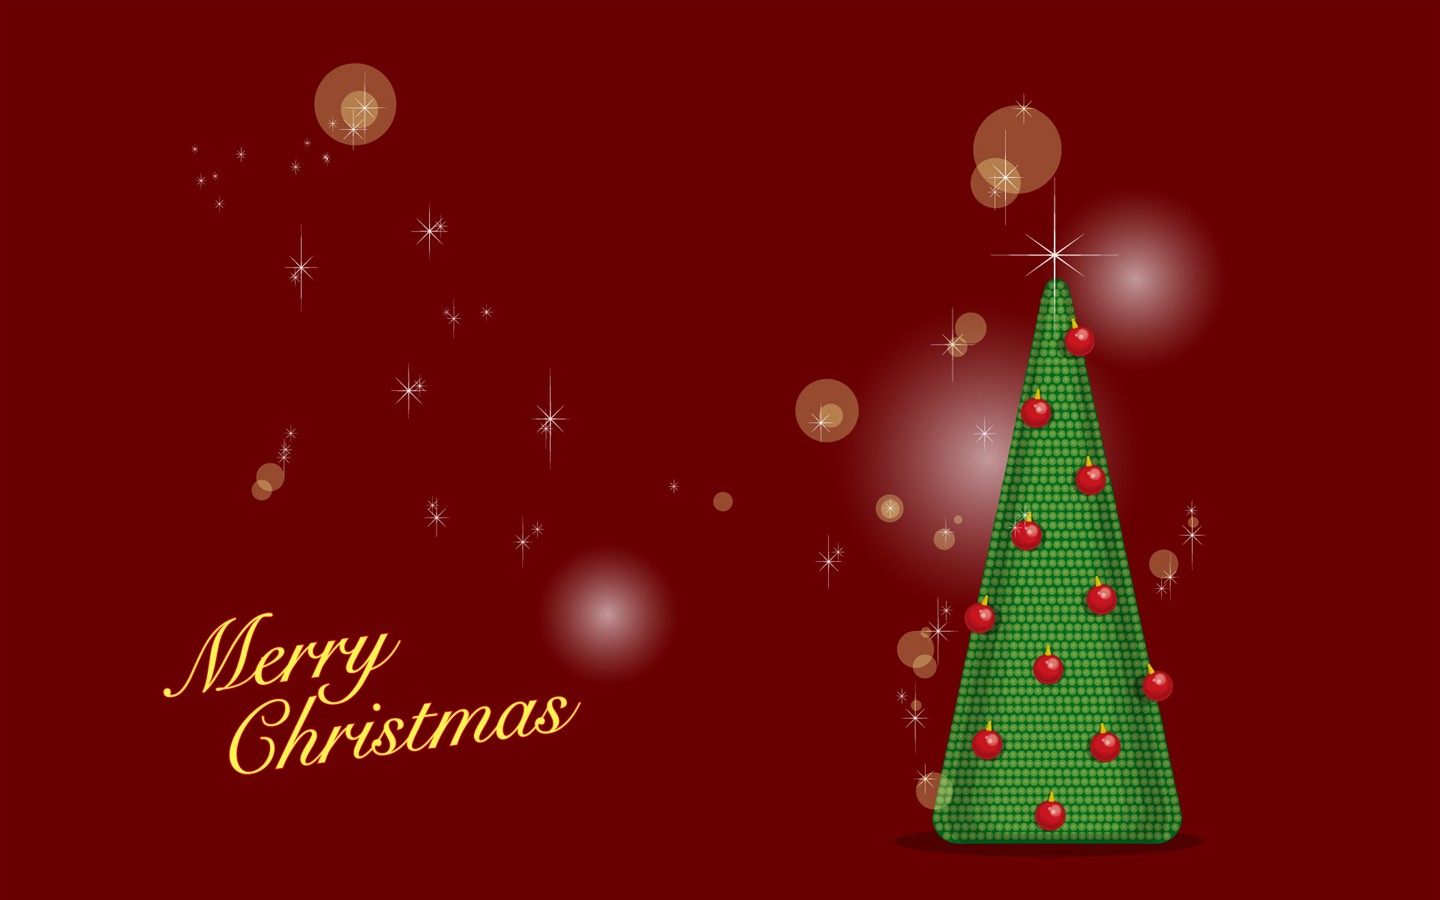 Exquisite Christmas Theme HD Wallpapers #21 - 1440x900